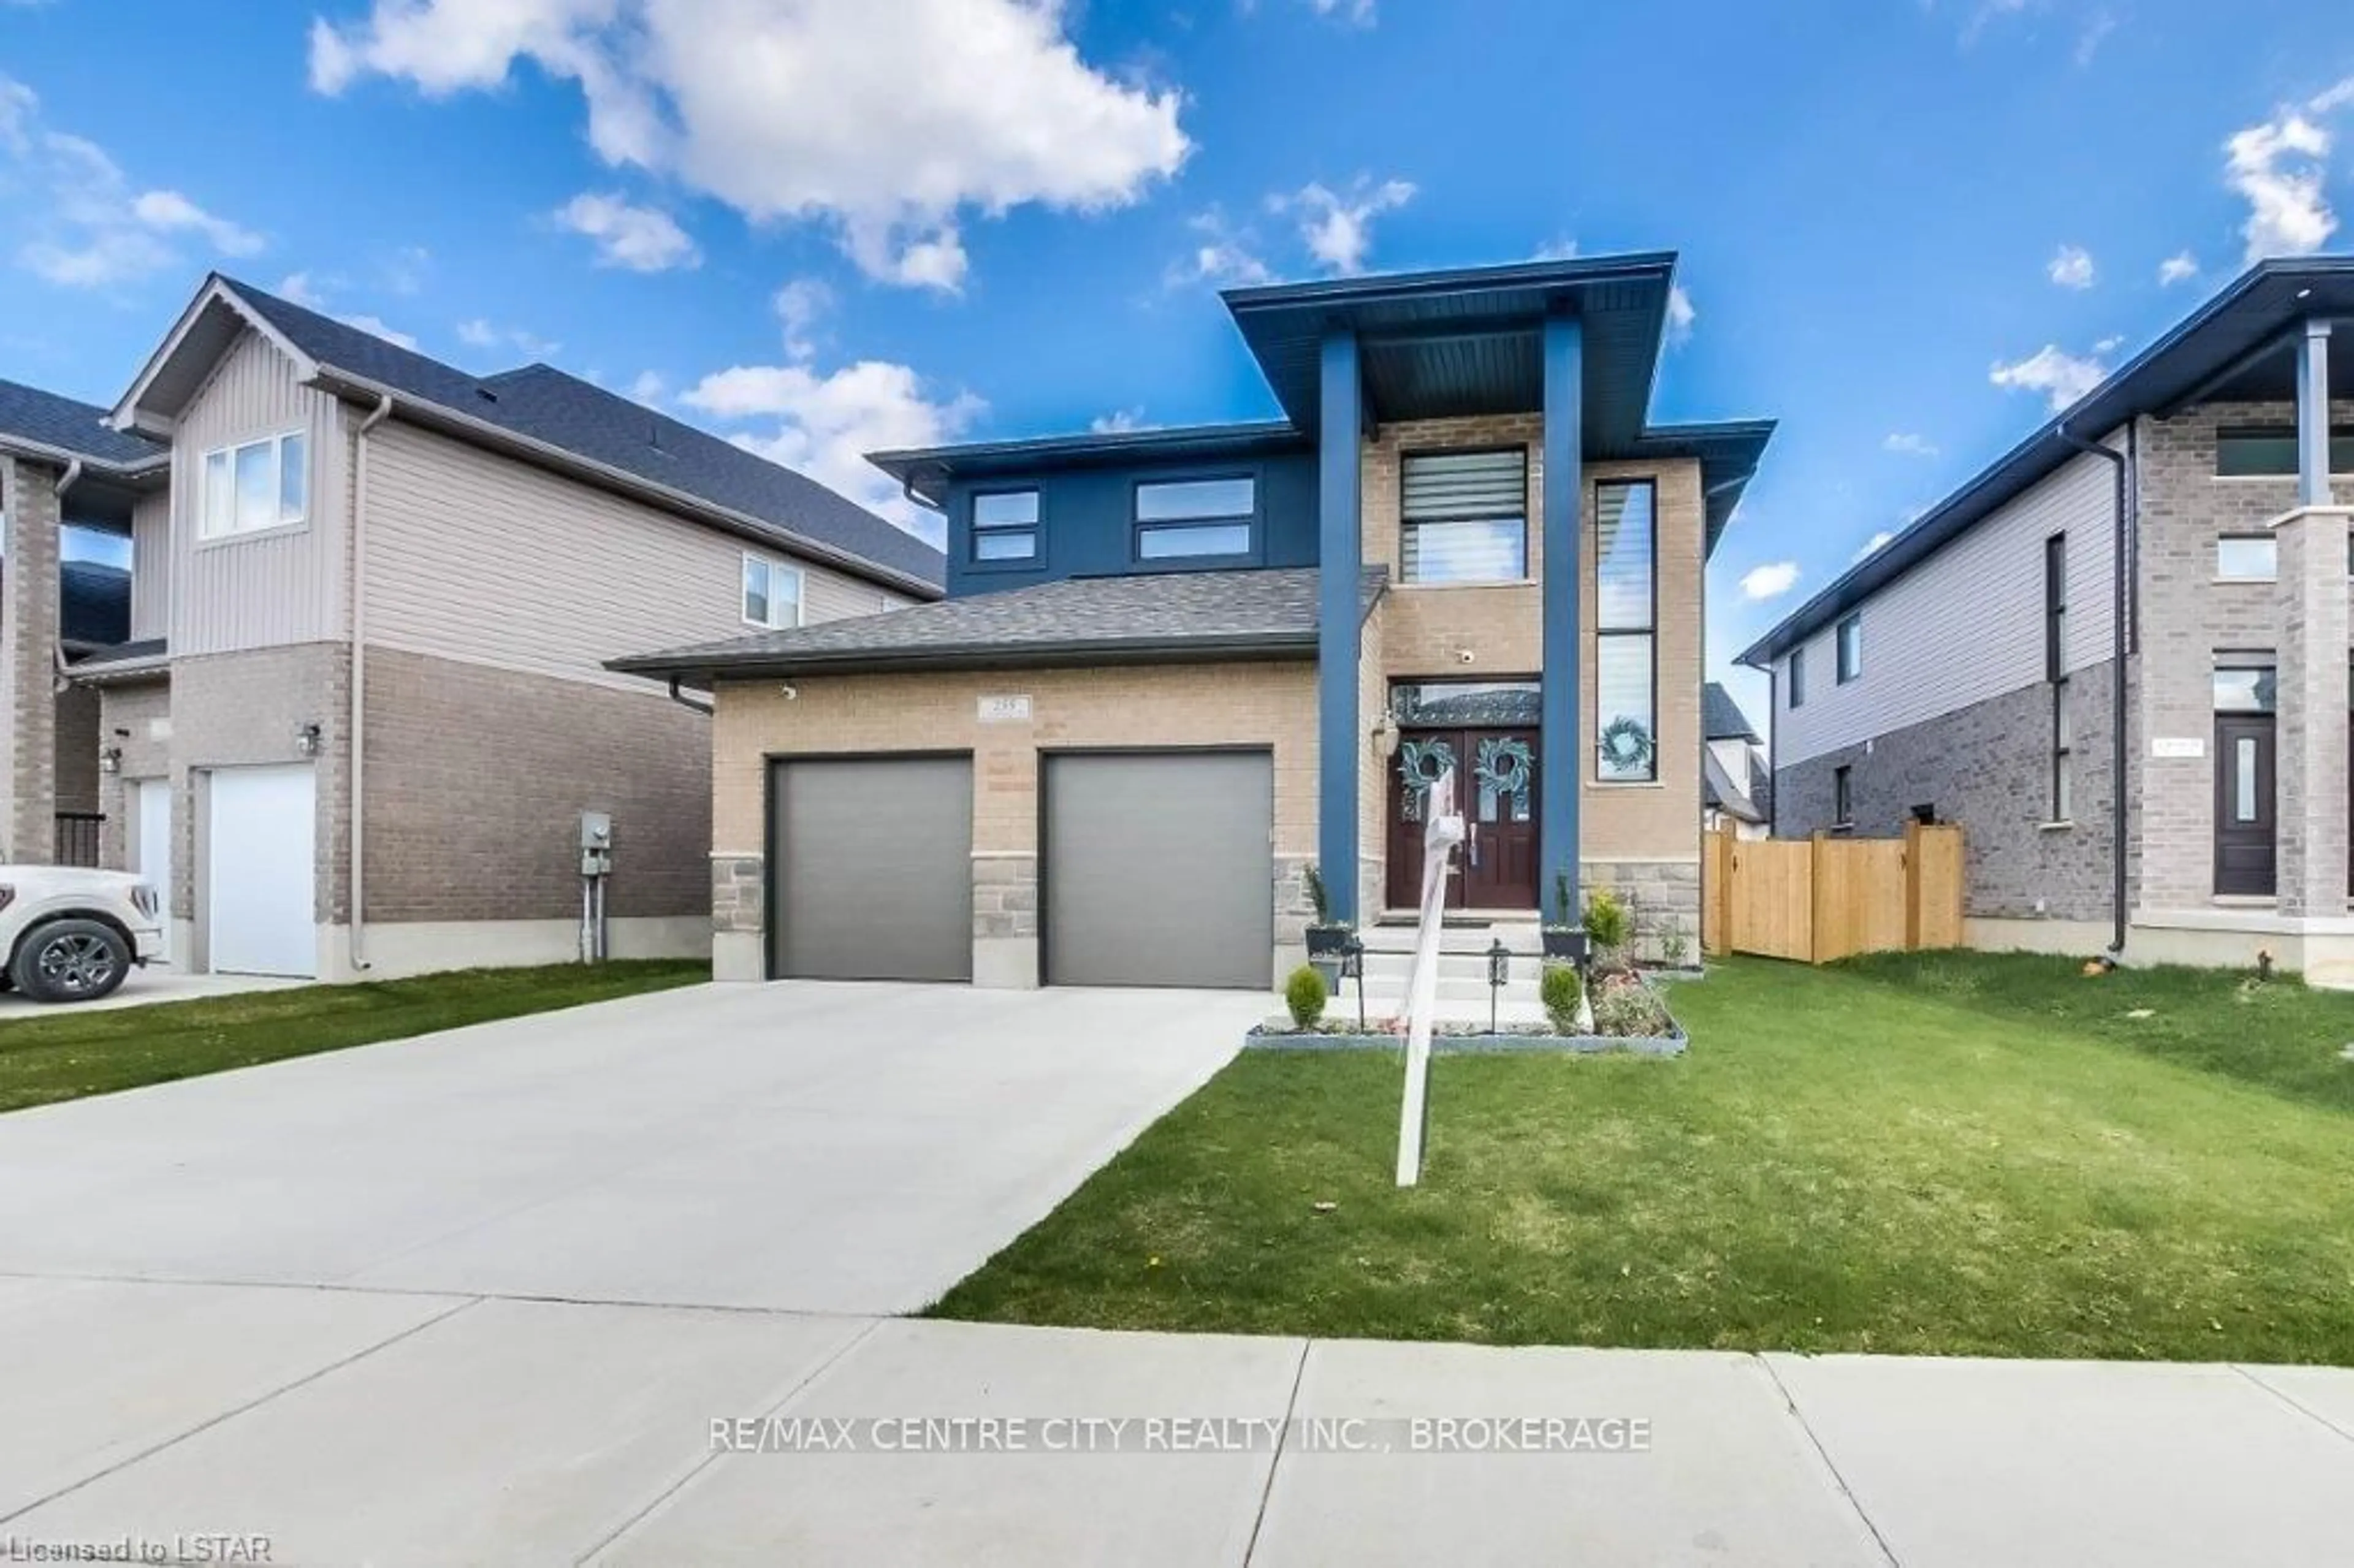 Frontside or backside of a home for 255 Crestview Dr, Middlesex Centre Ontario N0L 1R0